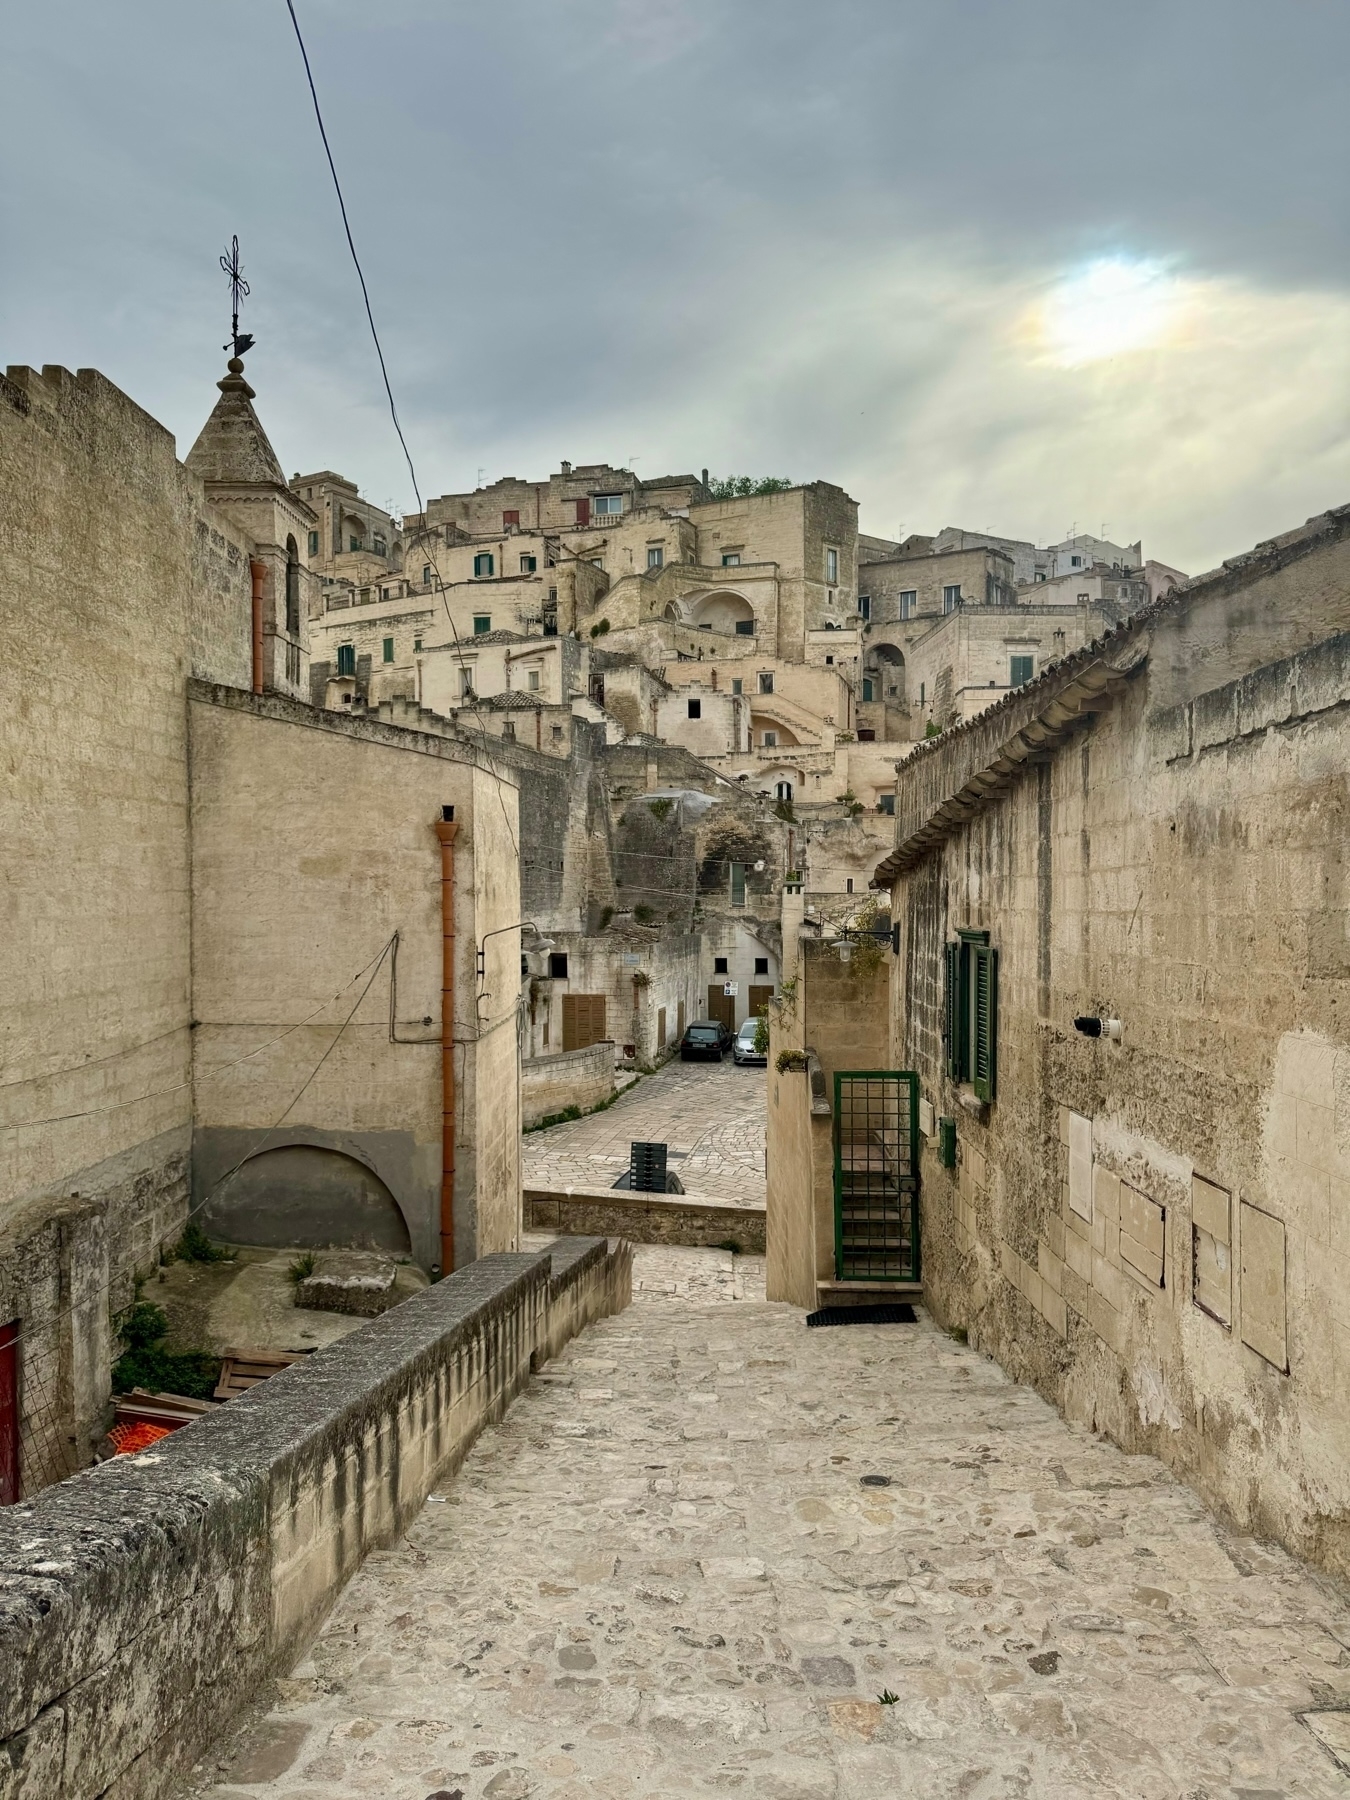 Historic stone buildings densely packed on a hillside under a cloudy sky. Stone-paved pathway descends through the middle, with a few parked cars visible at the bottom. The architecture features a mix of arches, stairs, and balconies with weathered textures.